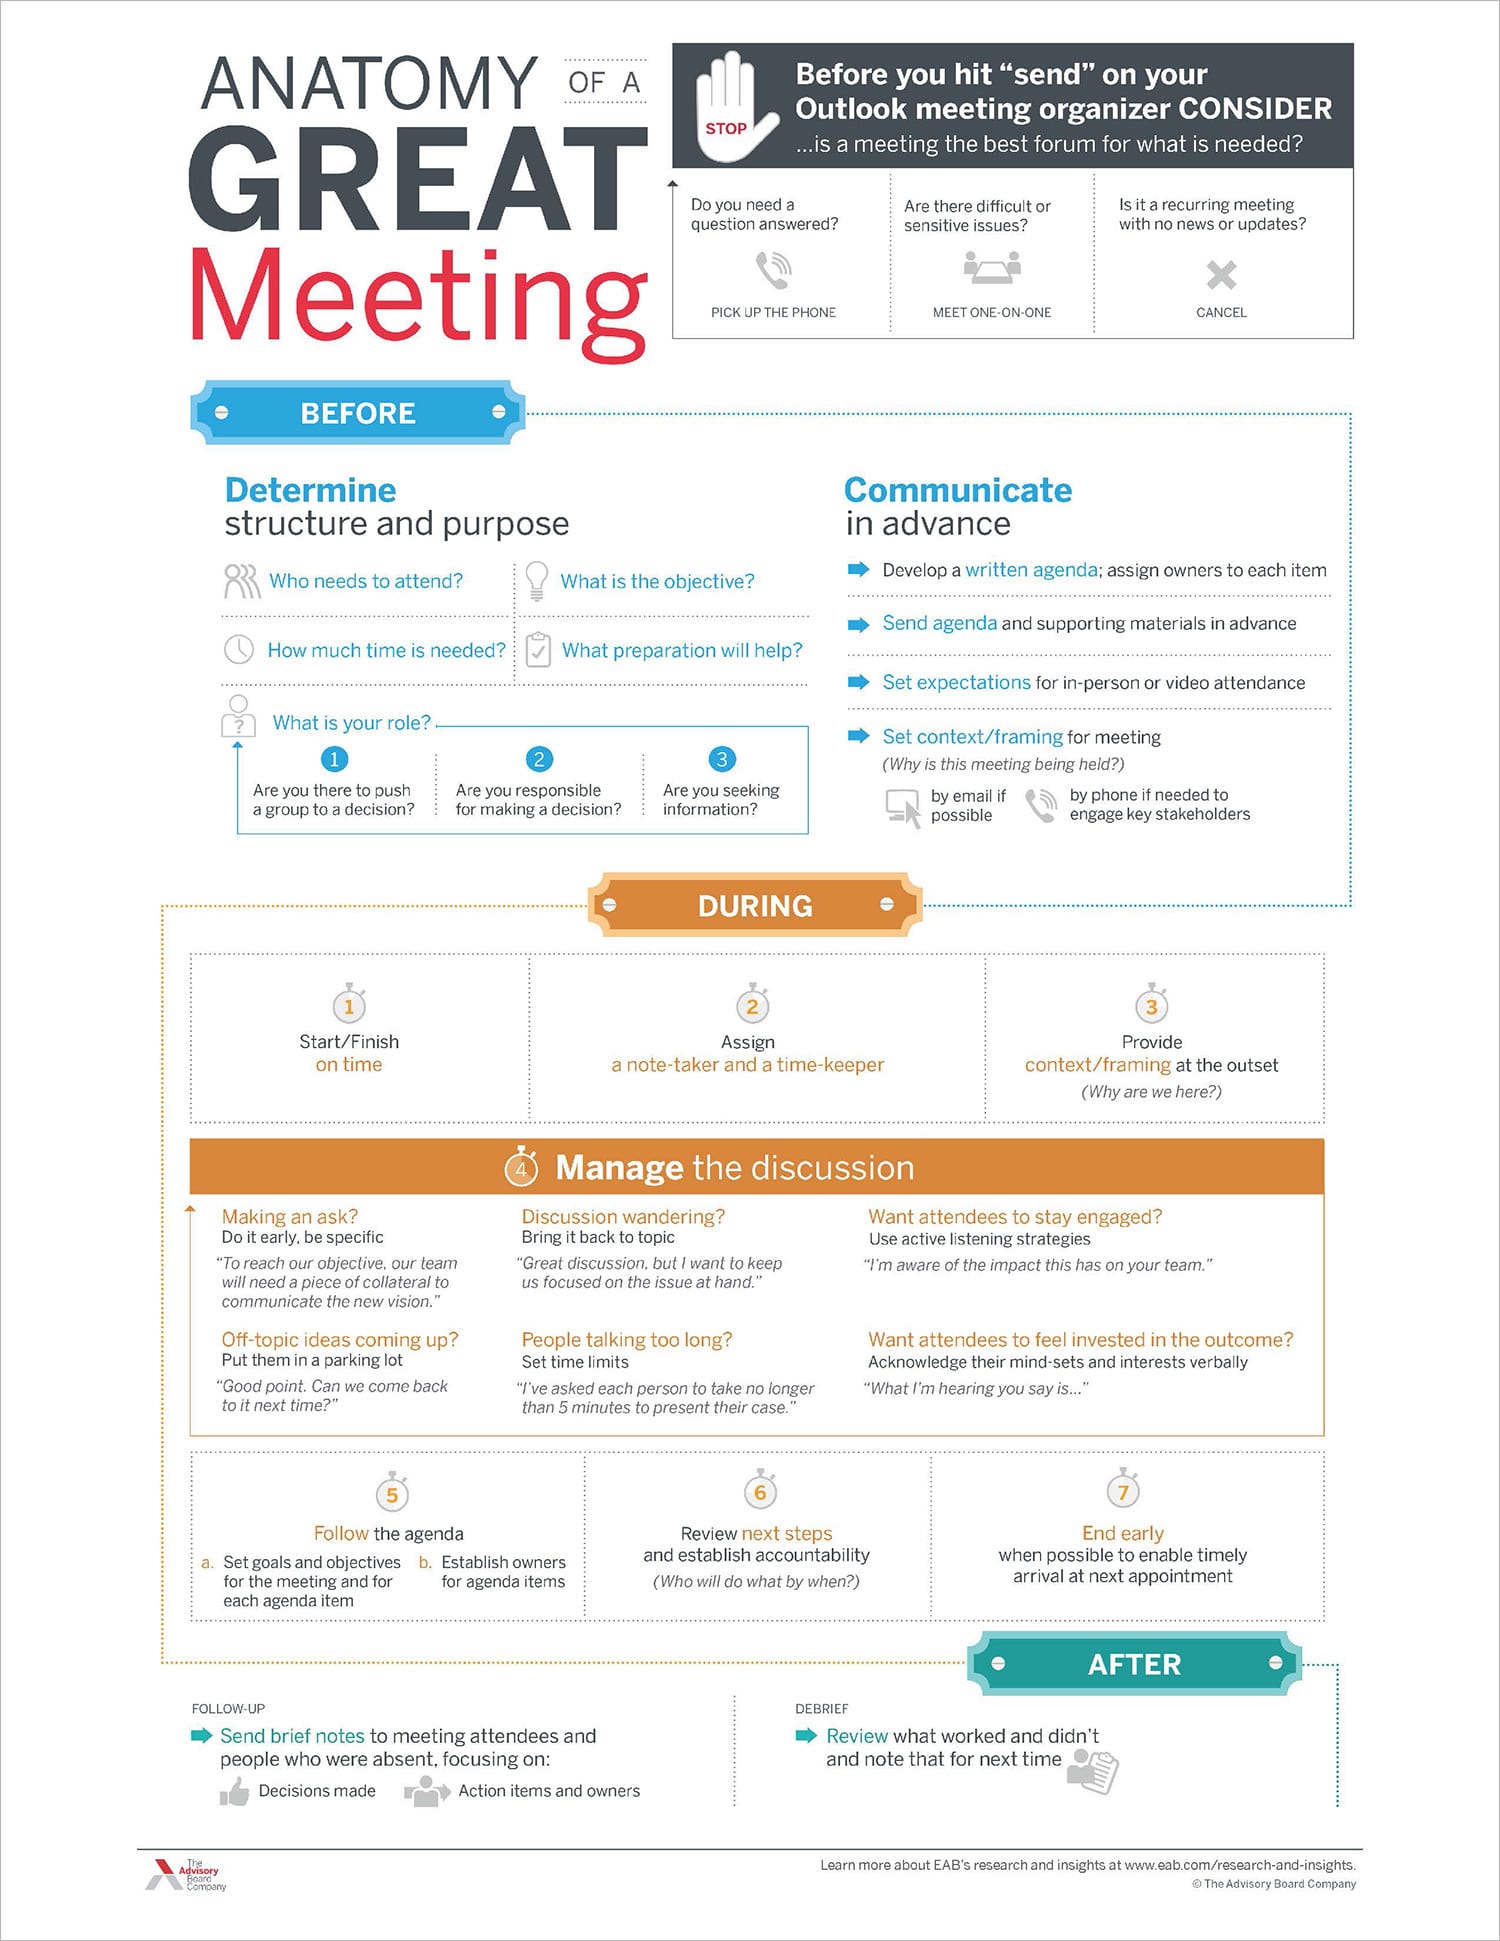 The anatomy of a great meeting